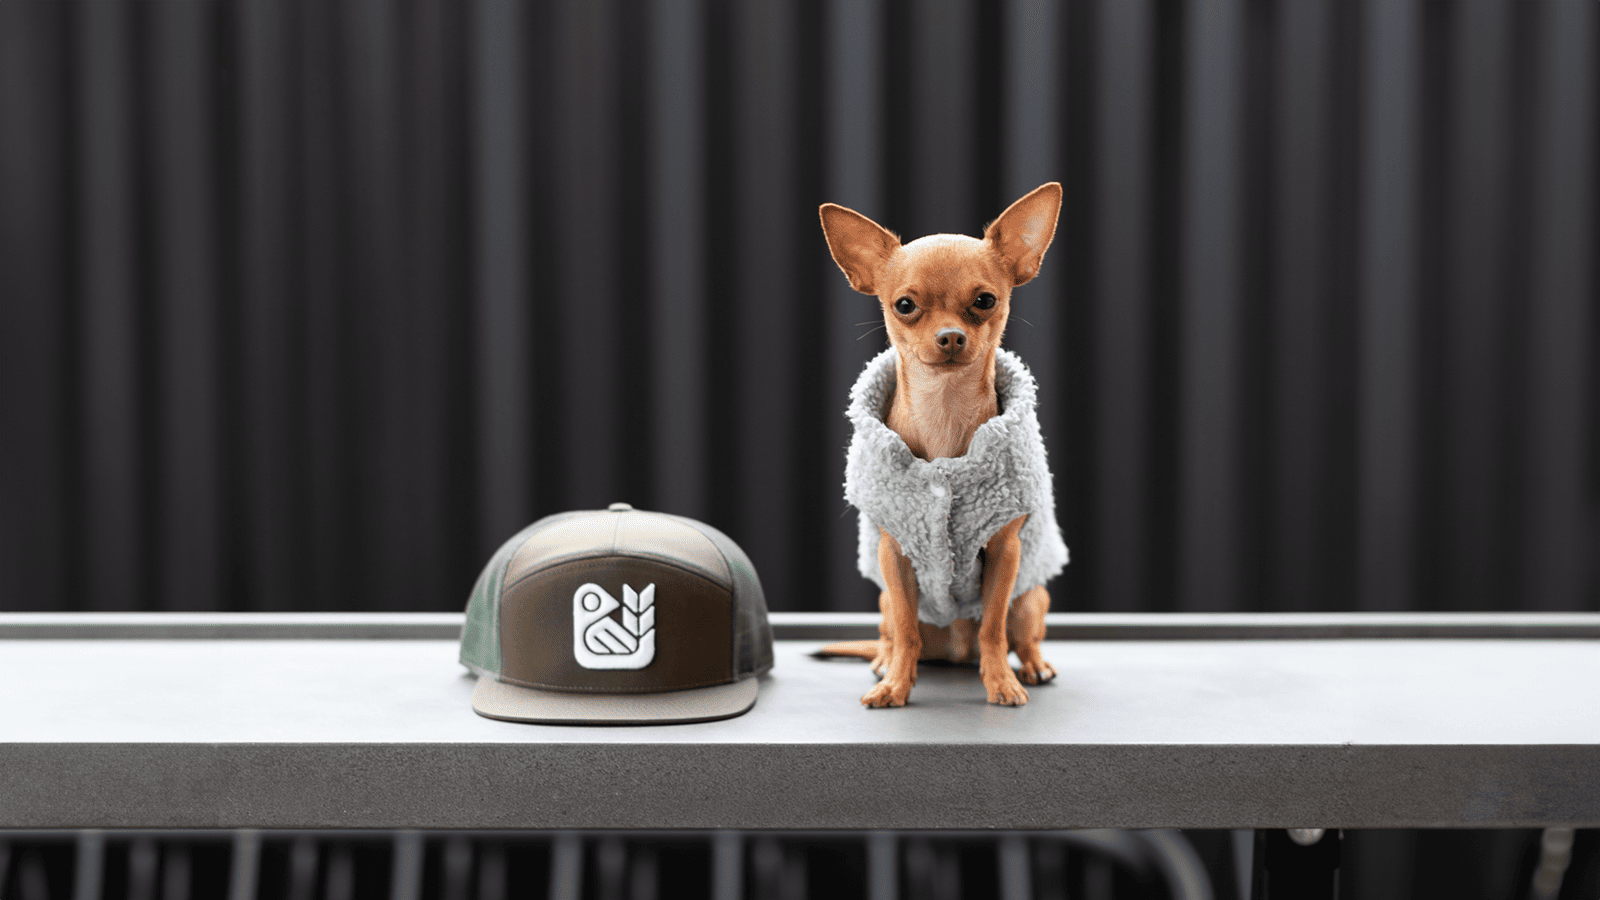 red bird brewing merch hat and dog